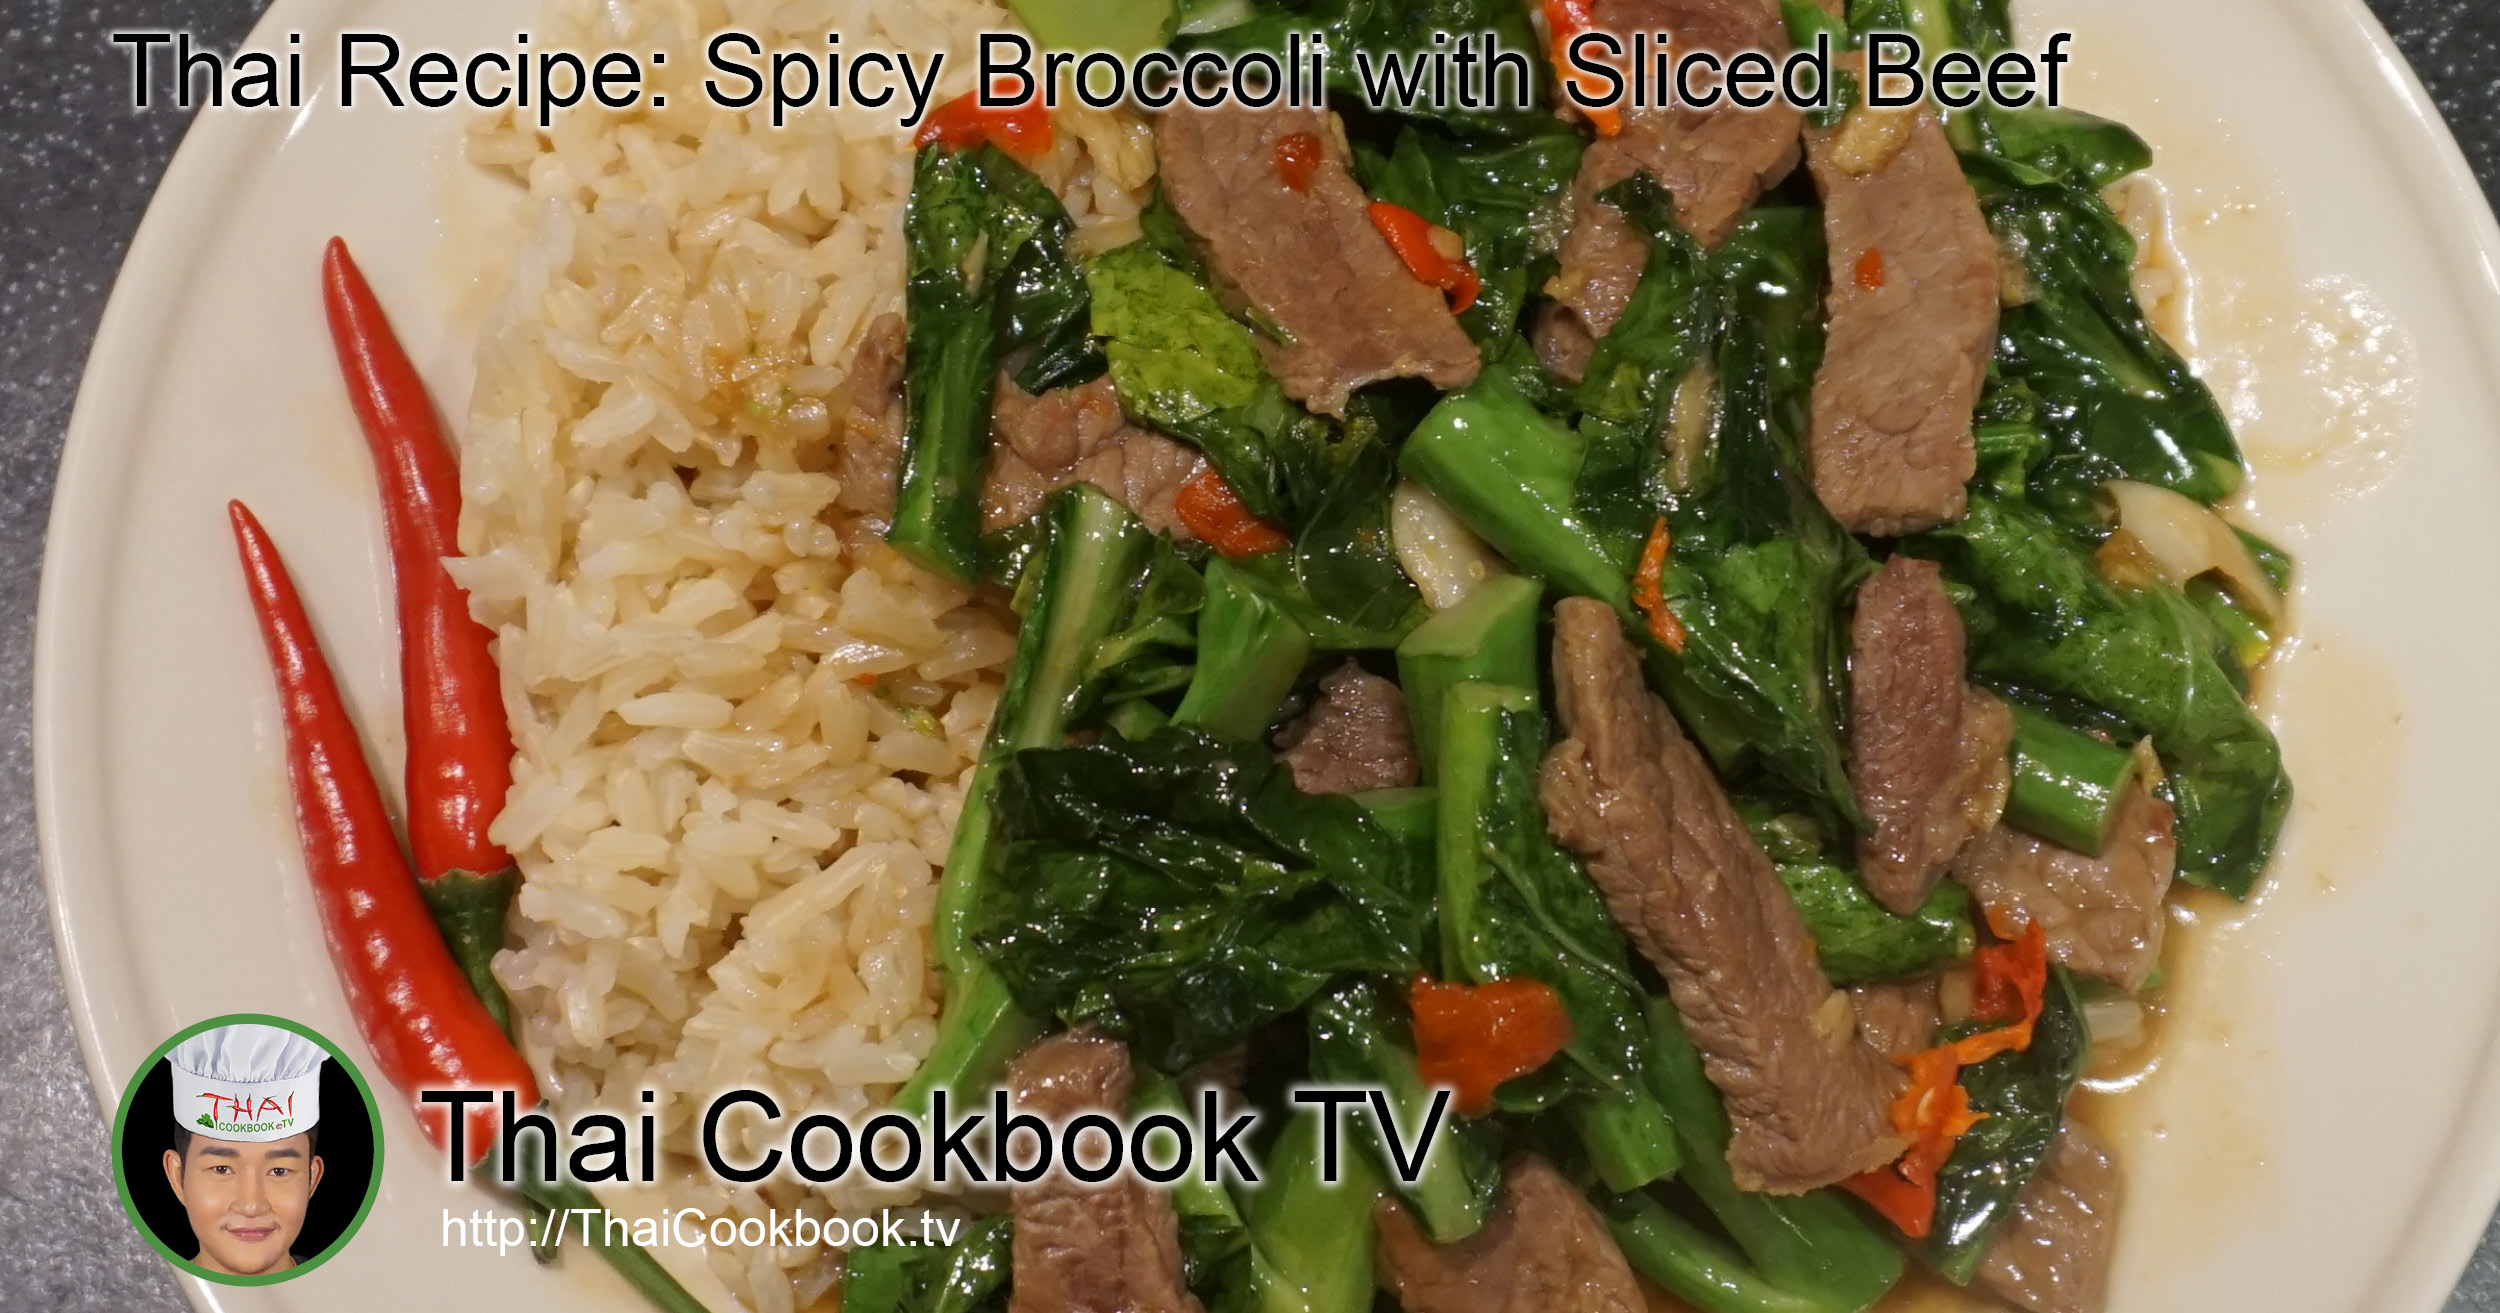 Authentic Thai Recipe for Spicy Beef with Broccoli